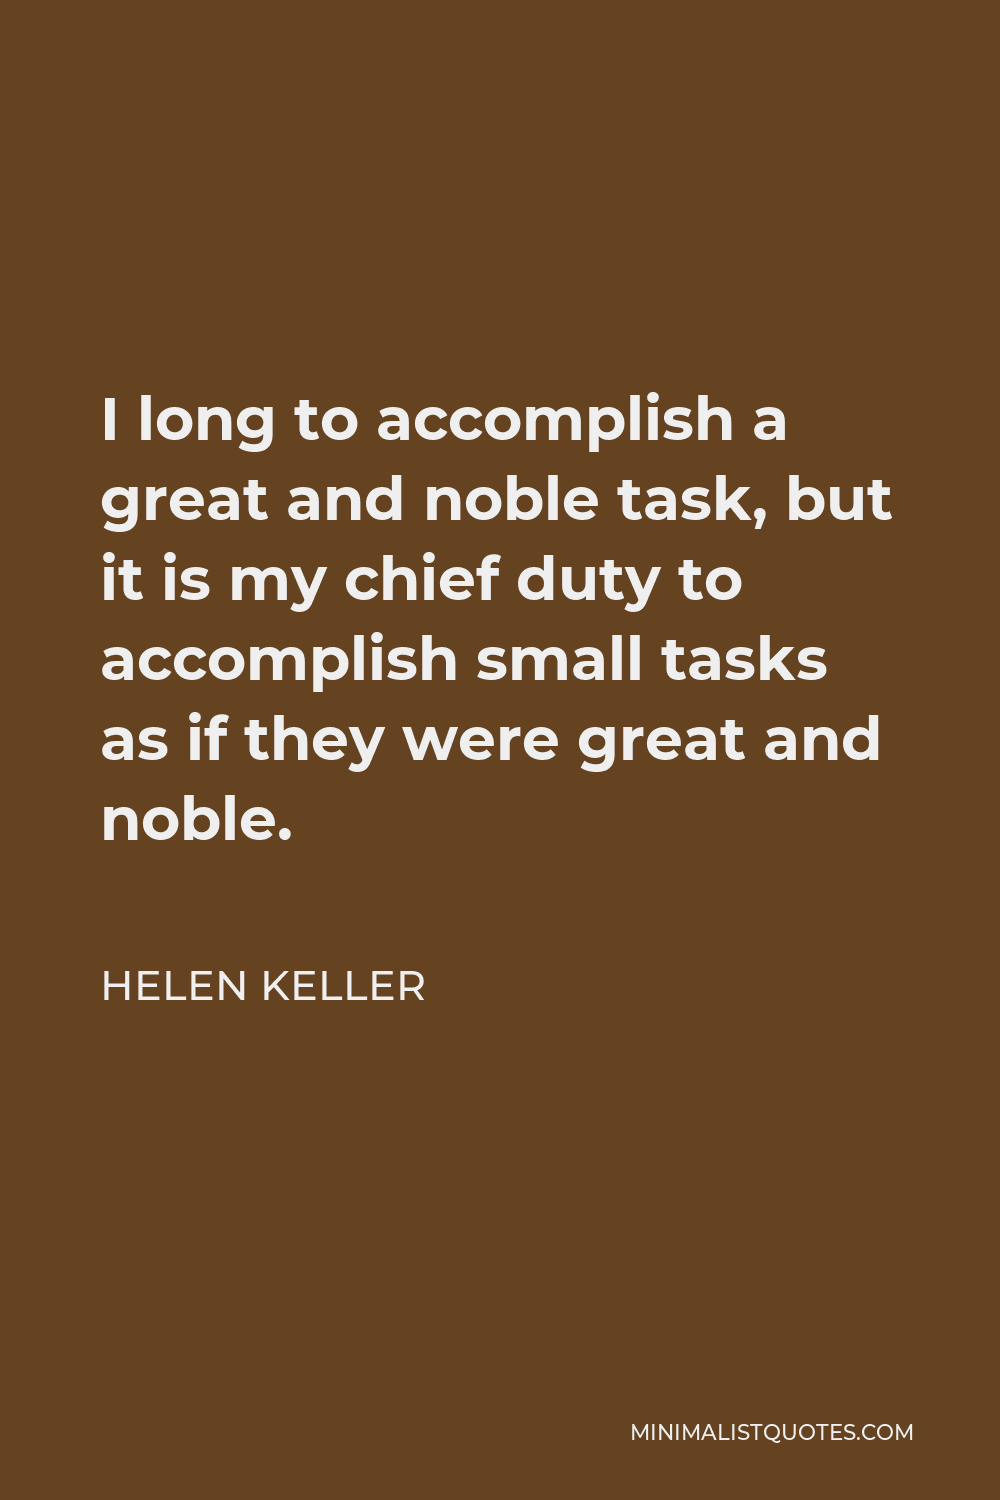 Helen Keller Quote - I long to accomplish a great and noble task, but it is my chief duty to accomplish small tasks as if they were great and noble.